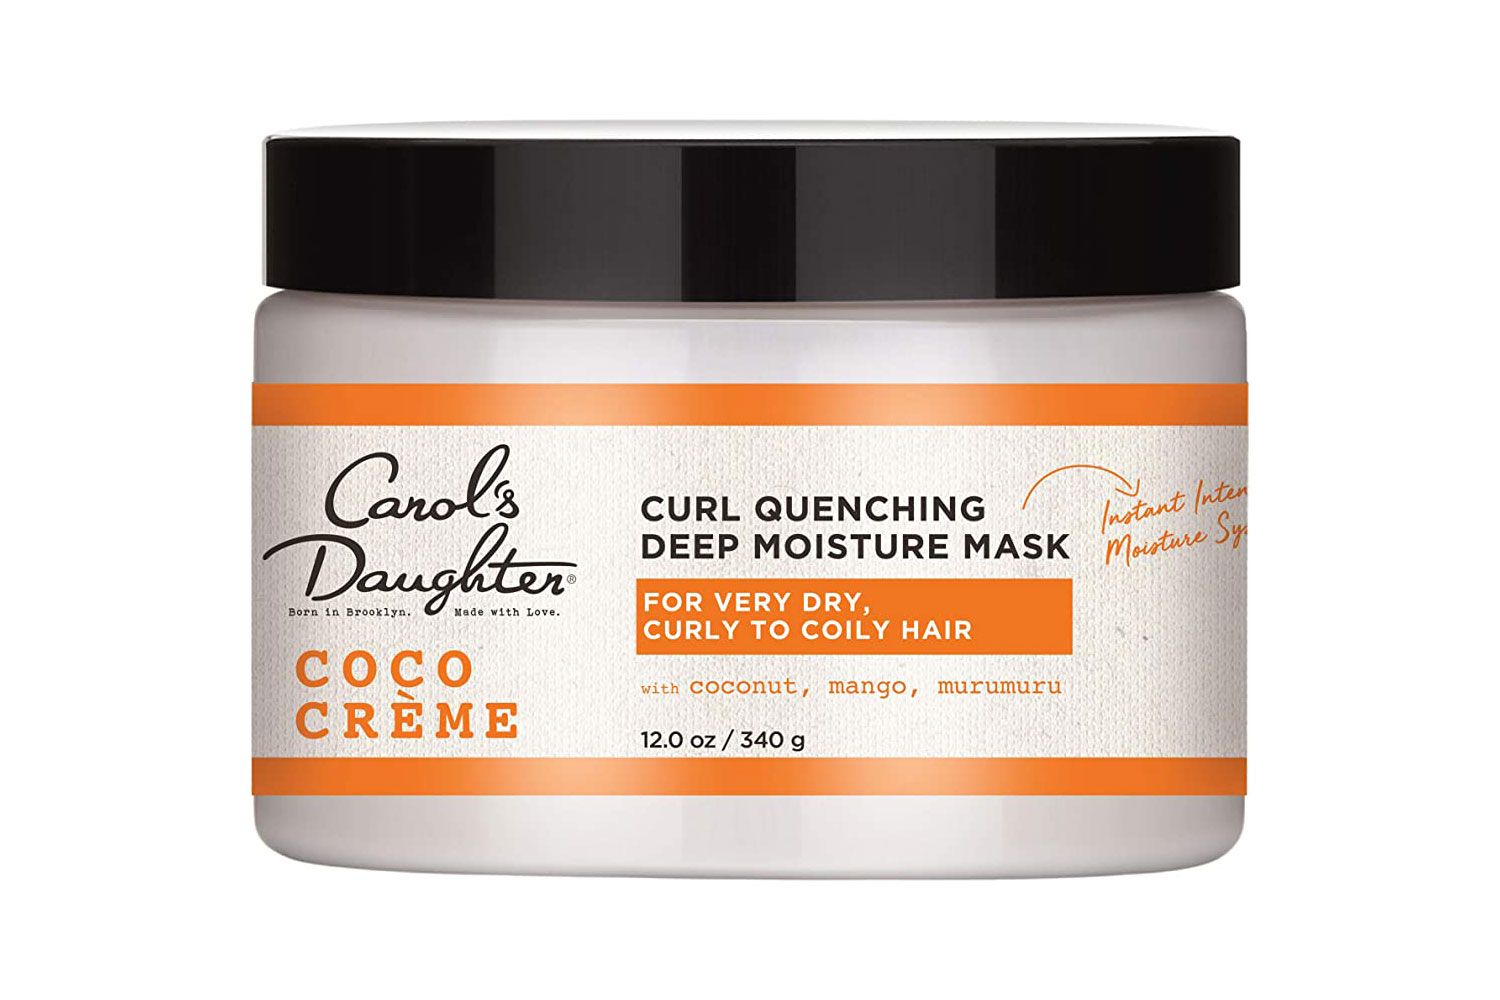 Carols-daughter-coco-crme-curl-quenching-deep-moisture-mask